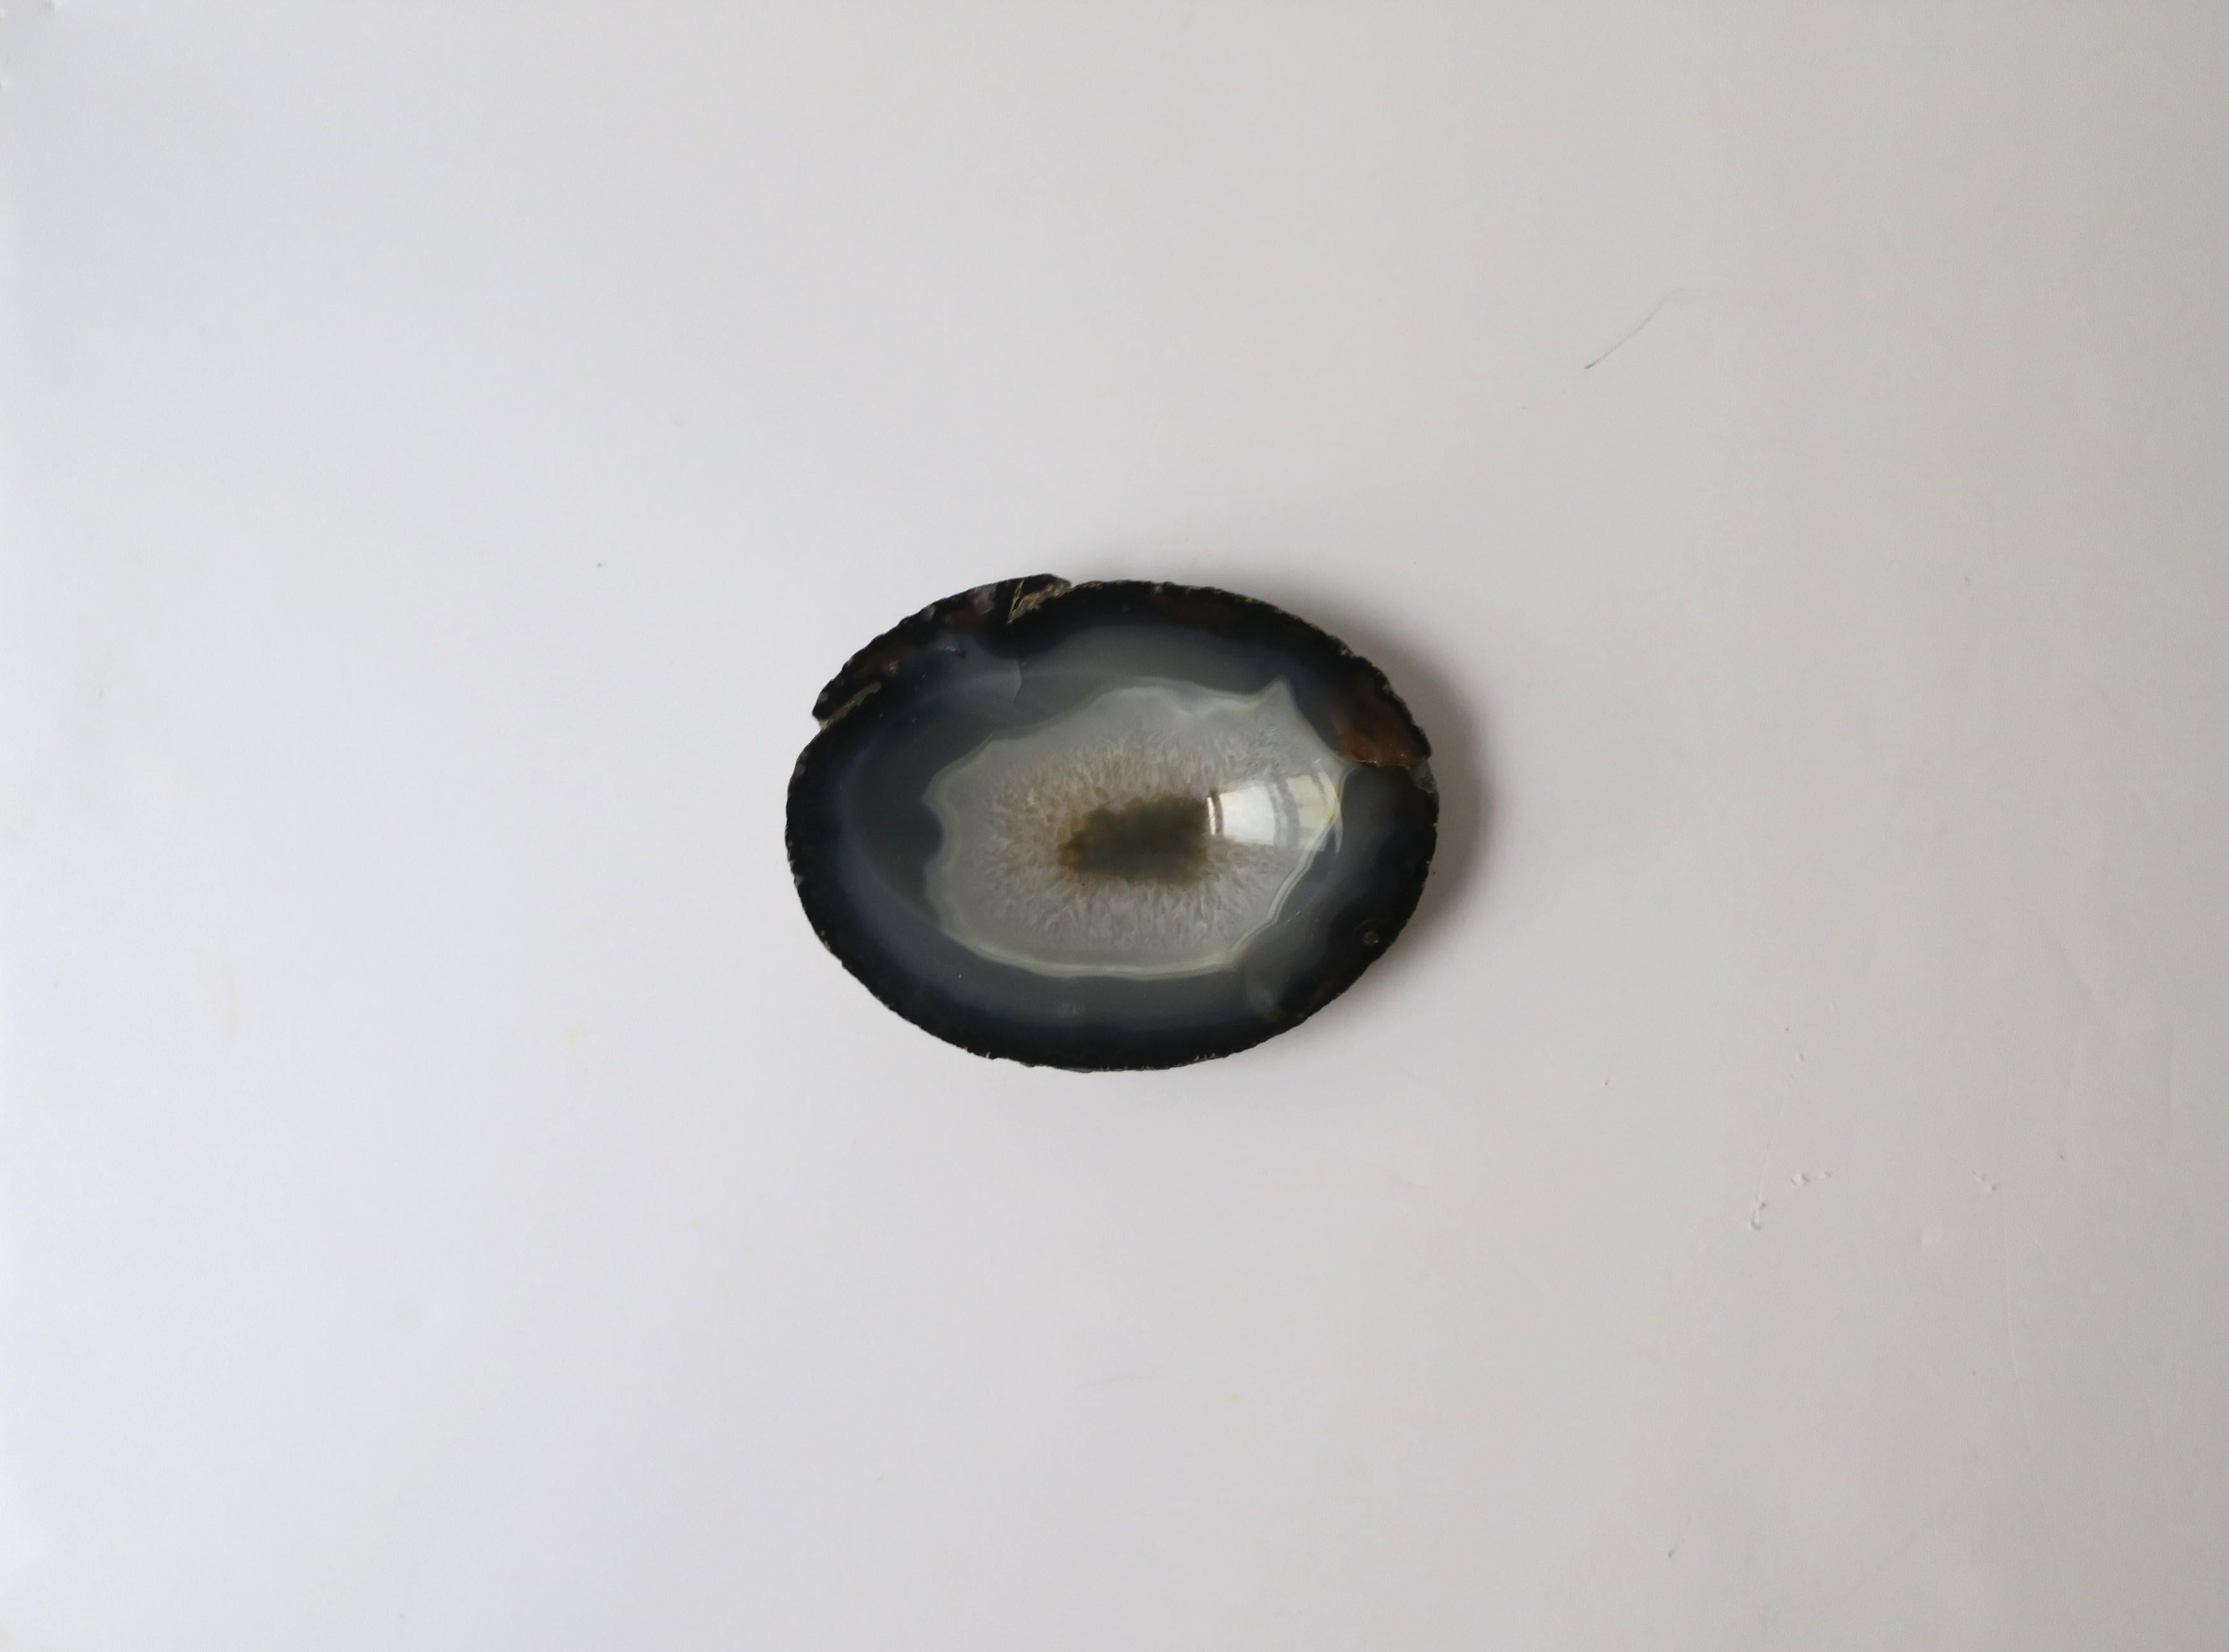 A beautiful, natural, blue/dark gray onyx agate dish, decorative object, or small bowl/vessel in the organic modern style. Piece can work as a small jewelry dish (demonstrated), a standalone decorative piece, or paperweight/desk accessory for small